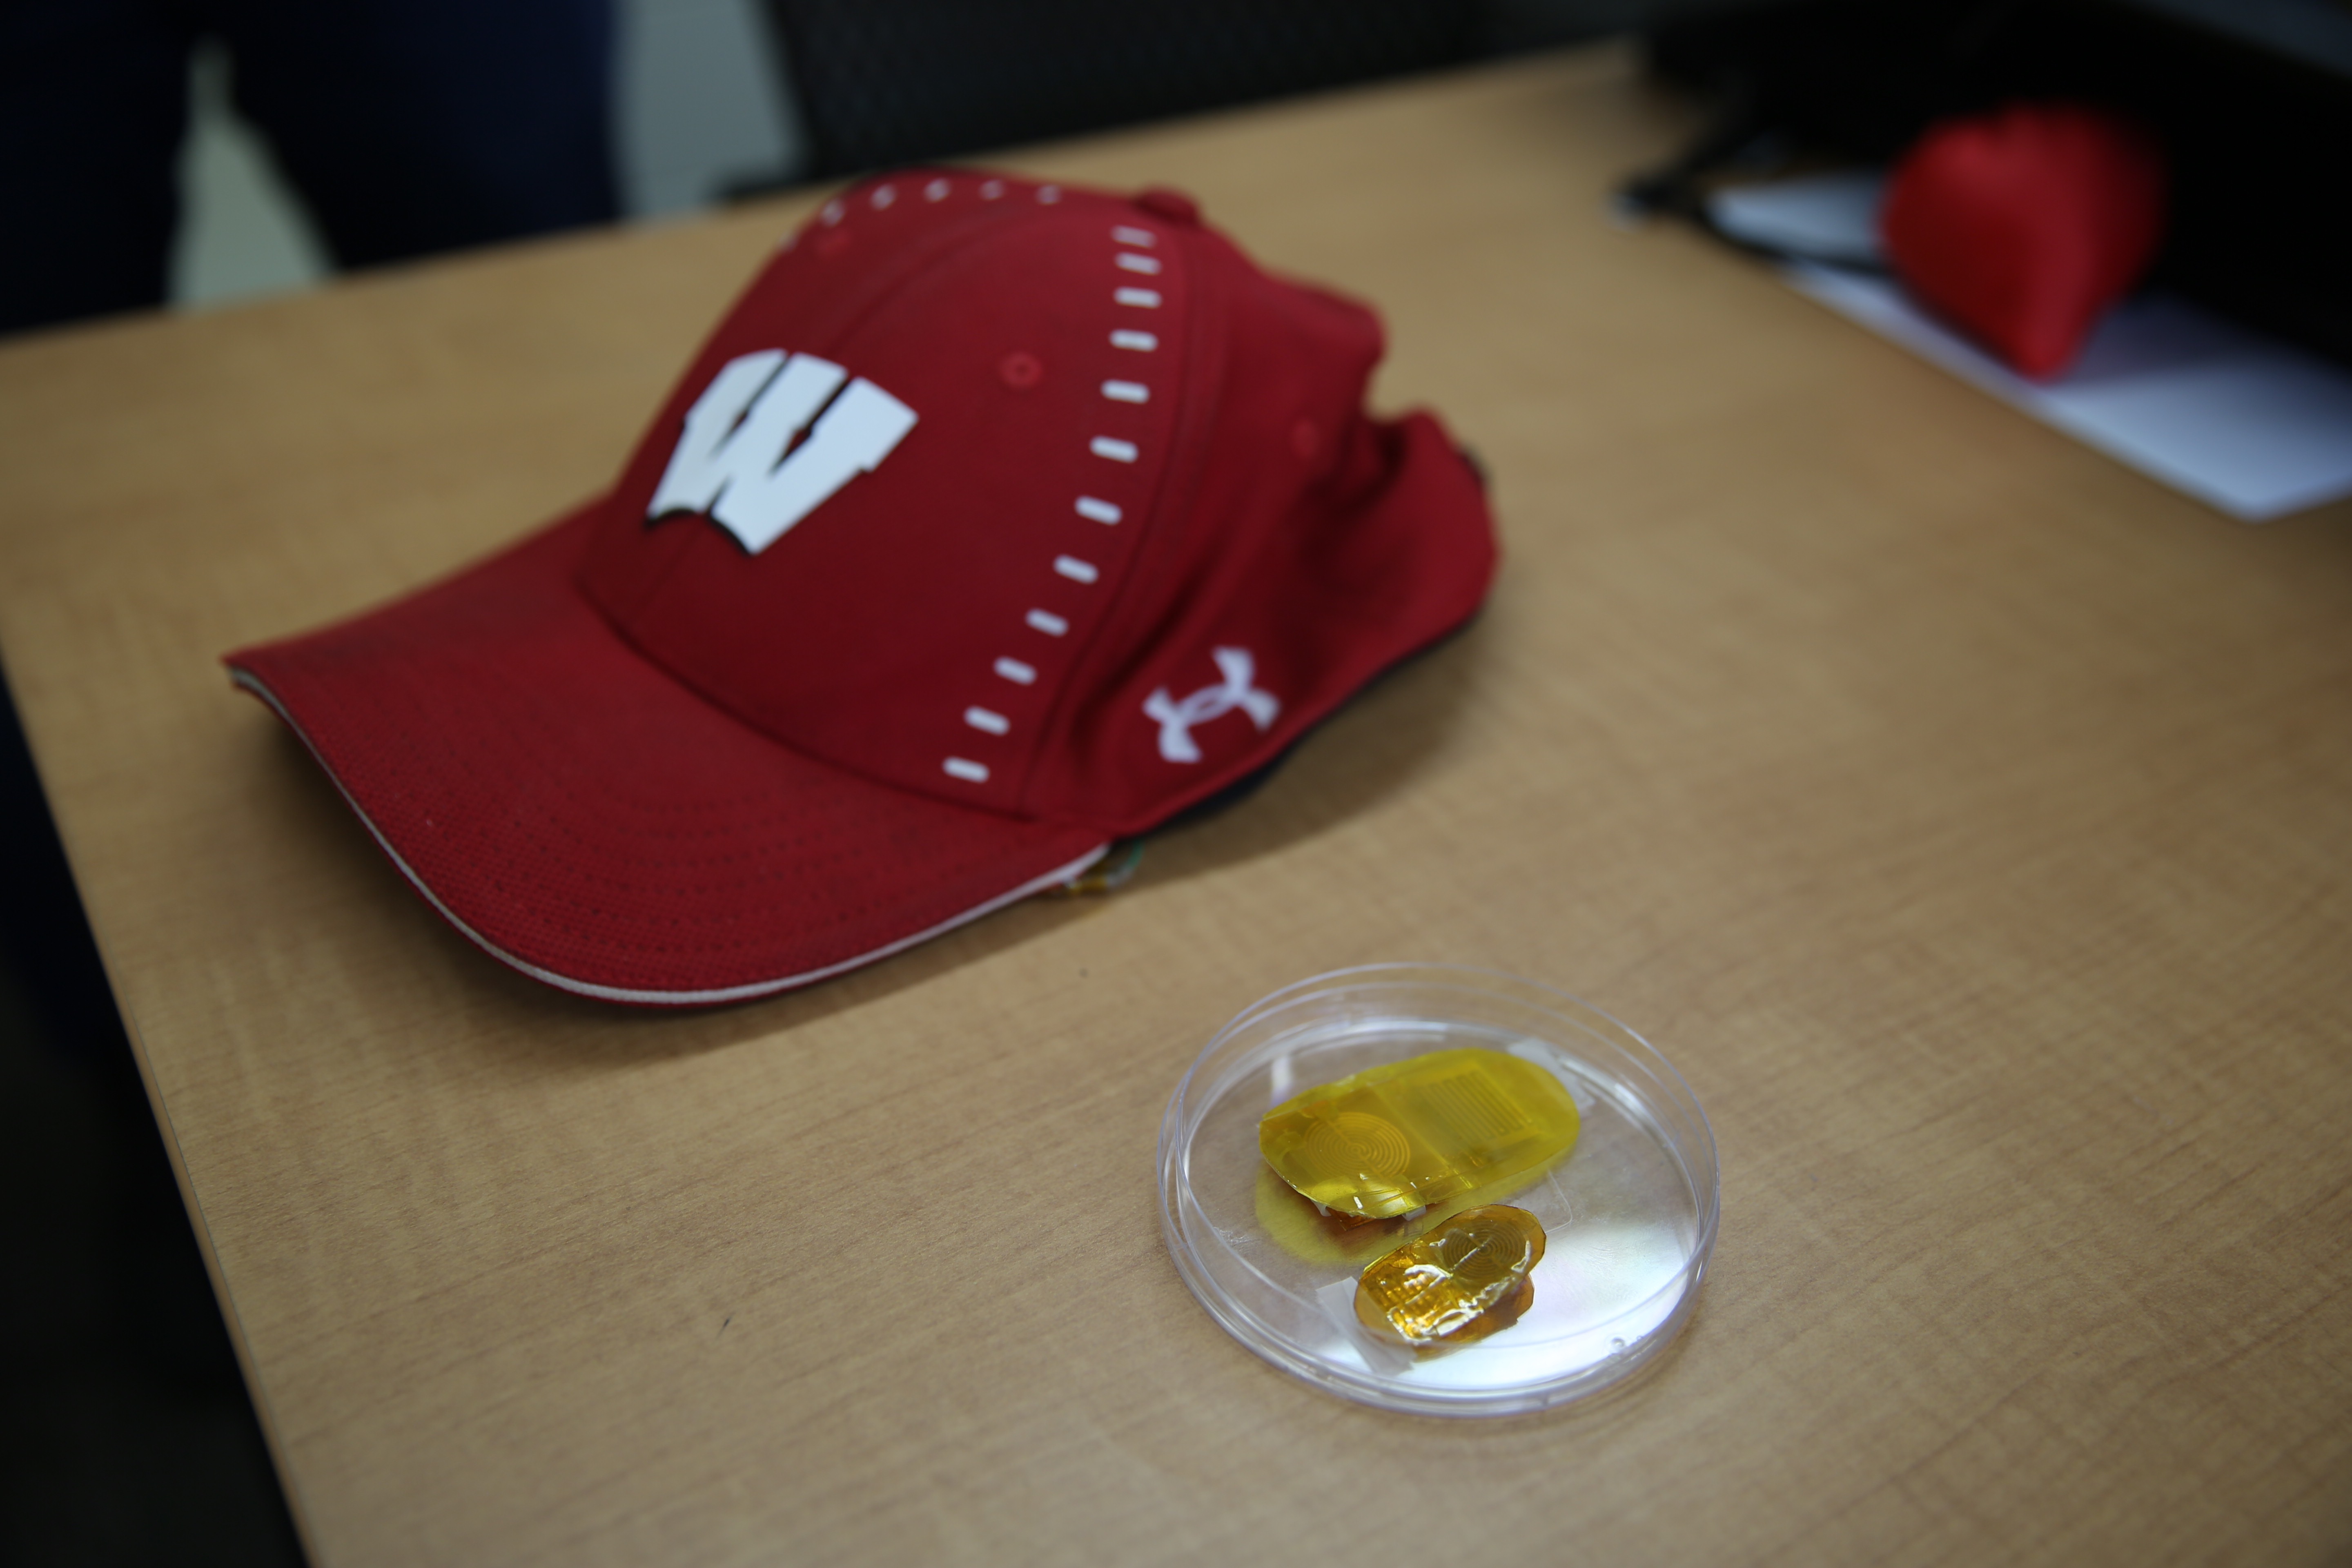 Photo: A baseball cap and a small yellow device.